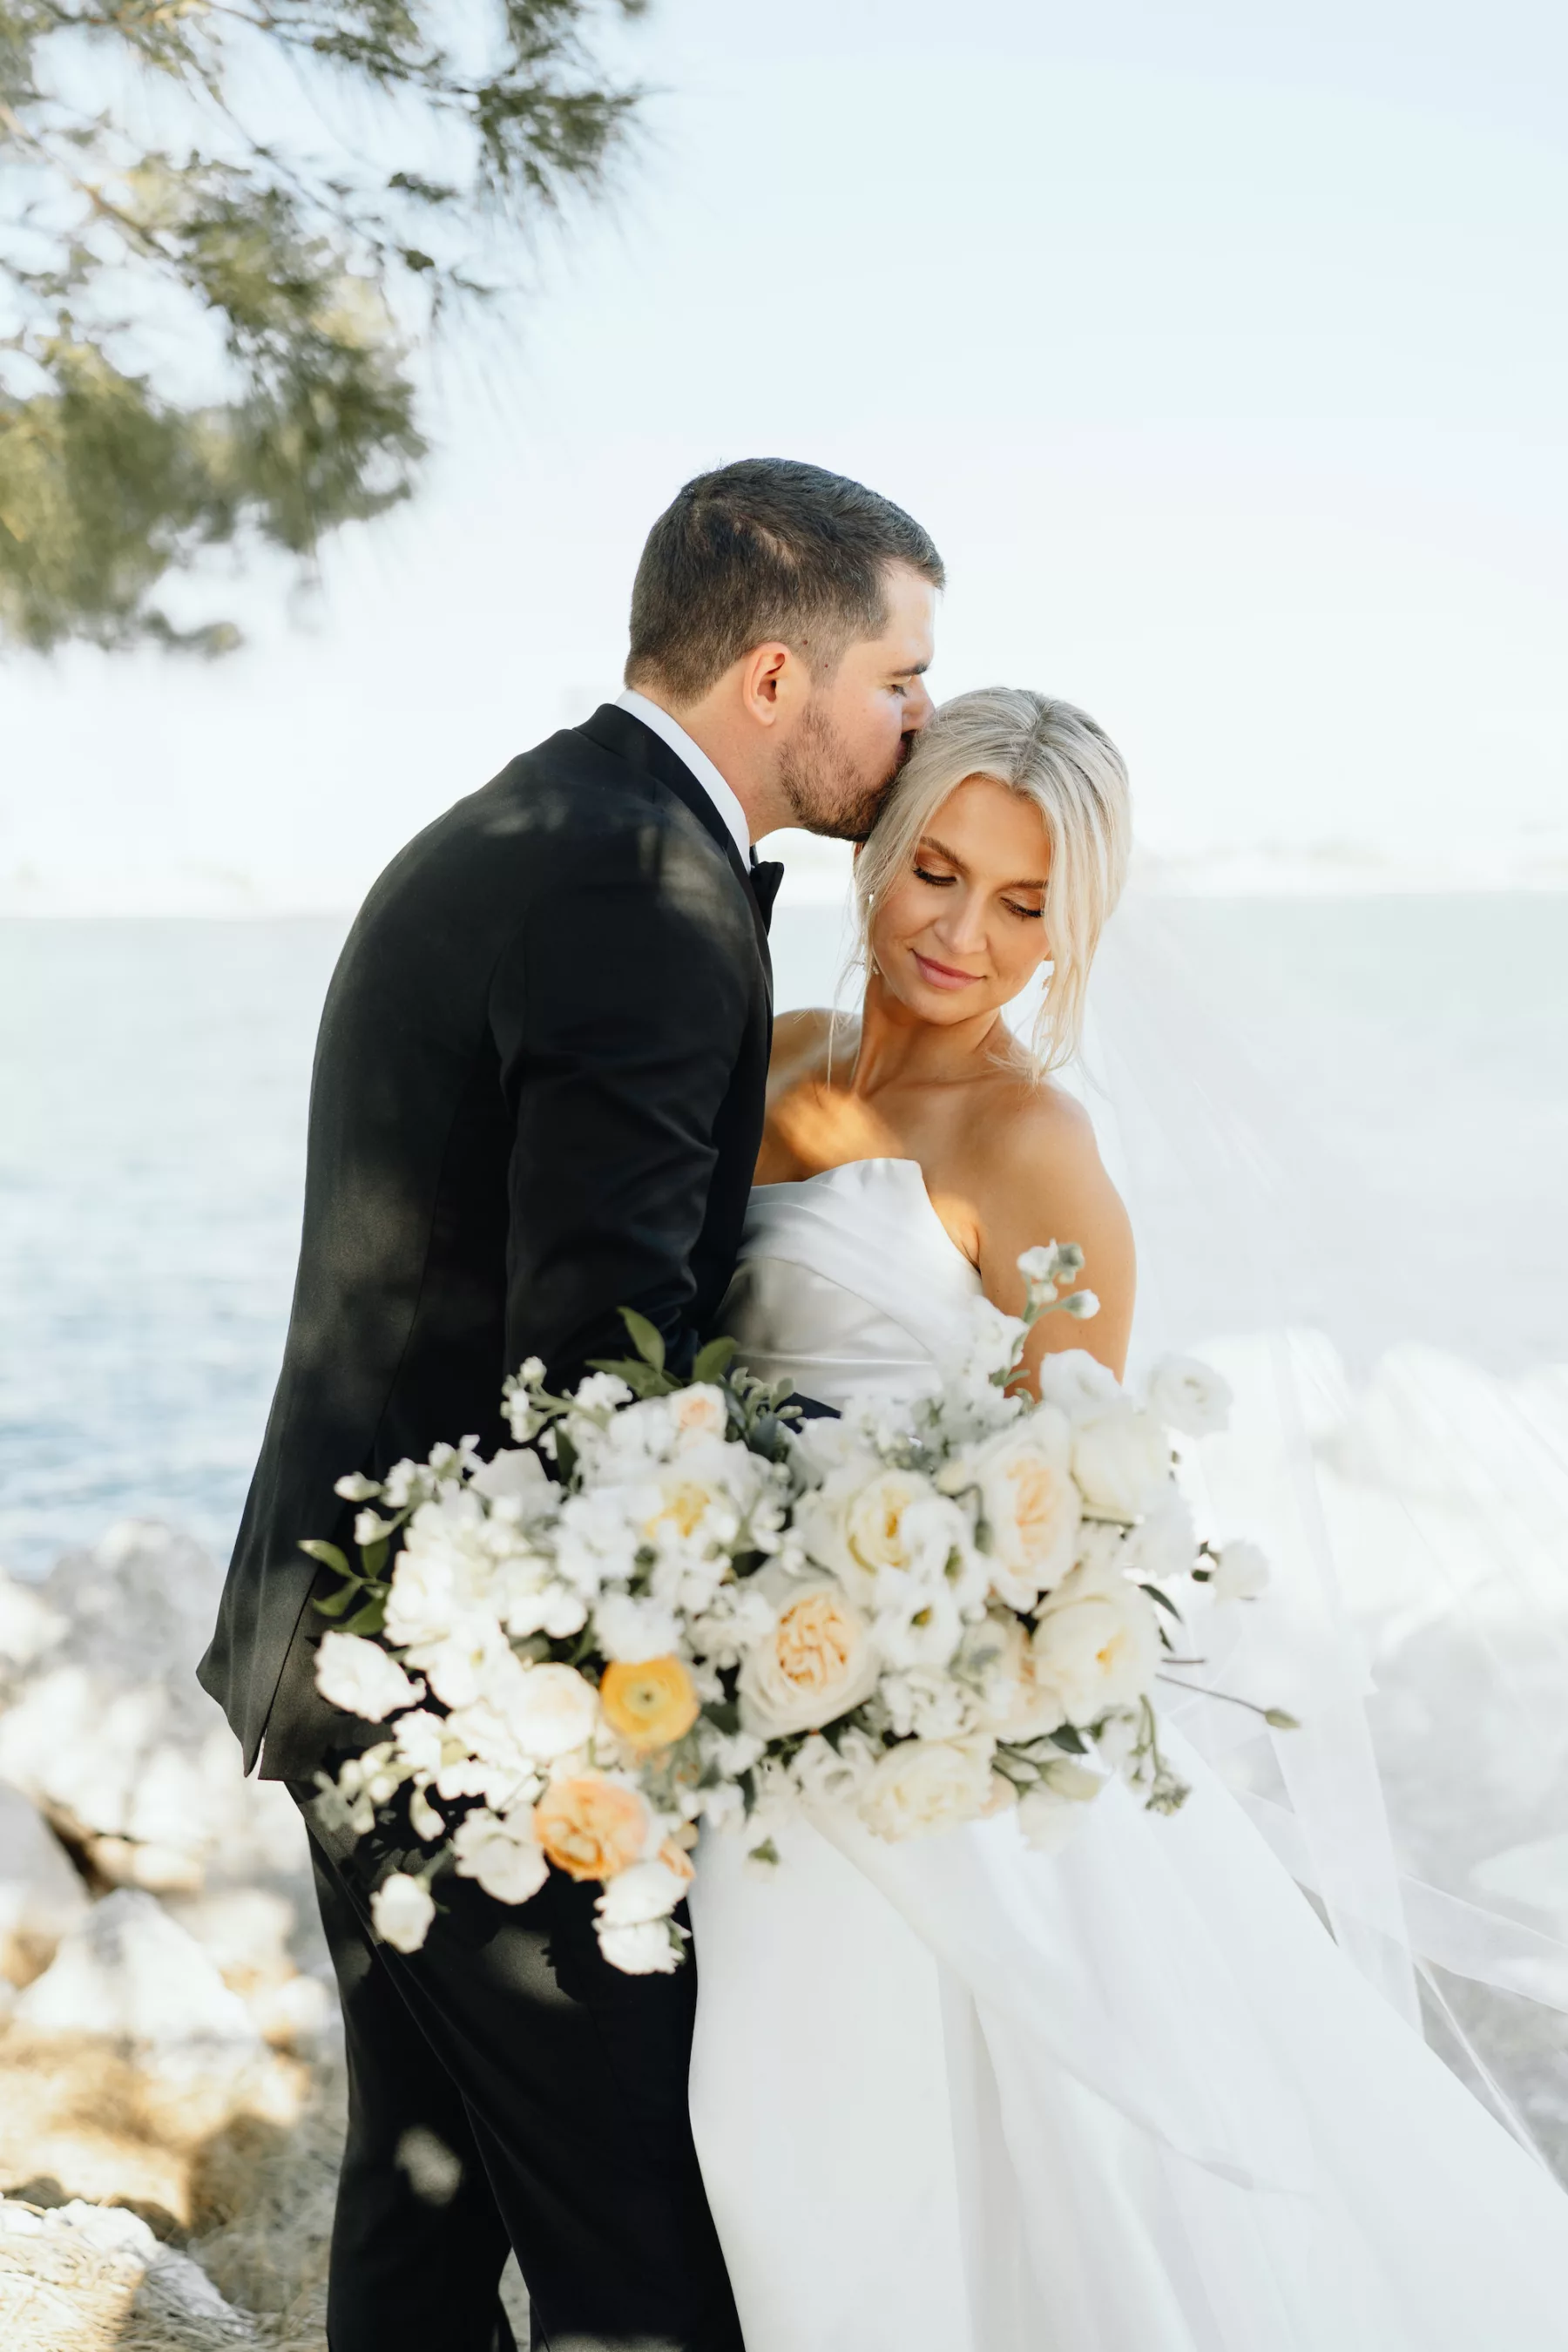 Bride and Groom First Look Wedding Portrait | Tampa Bay Photographer and Videographer J&S Media | Clearwater Content Creator Behind The Vows | Planner Wilder Mind Events